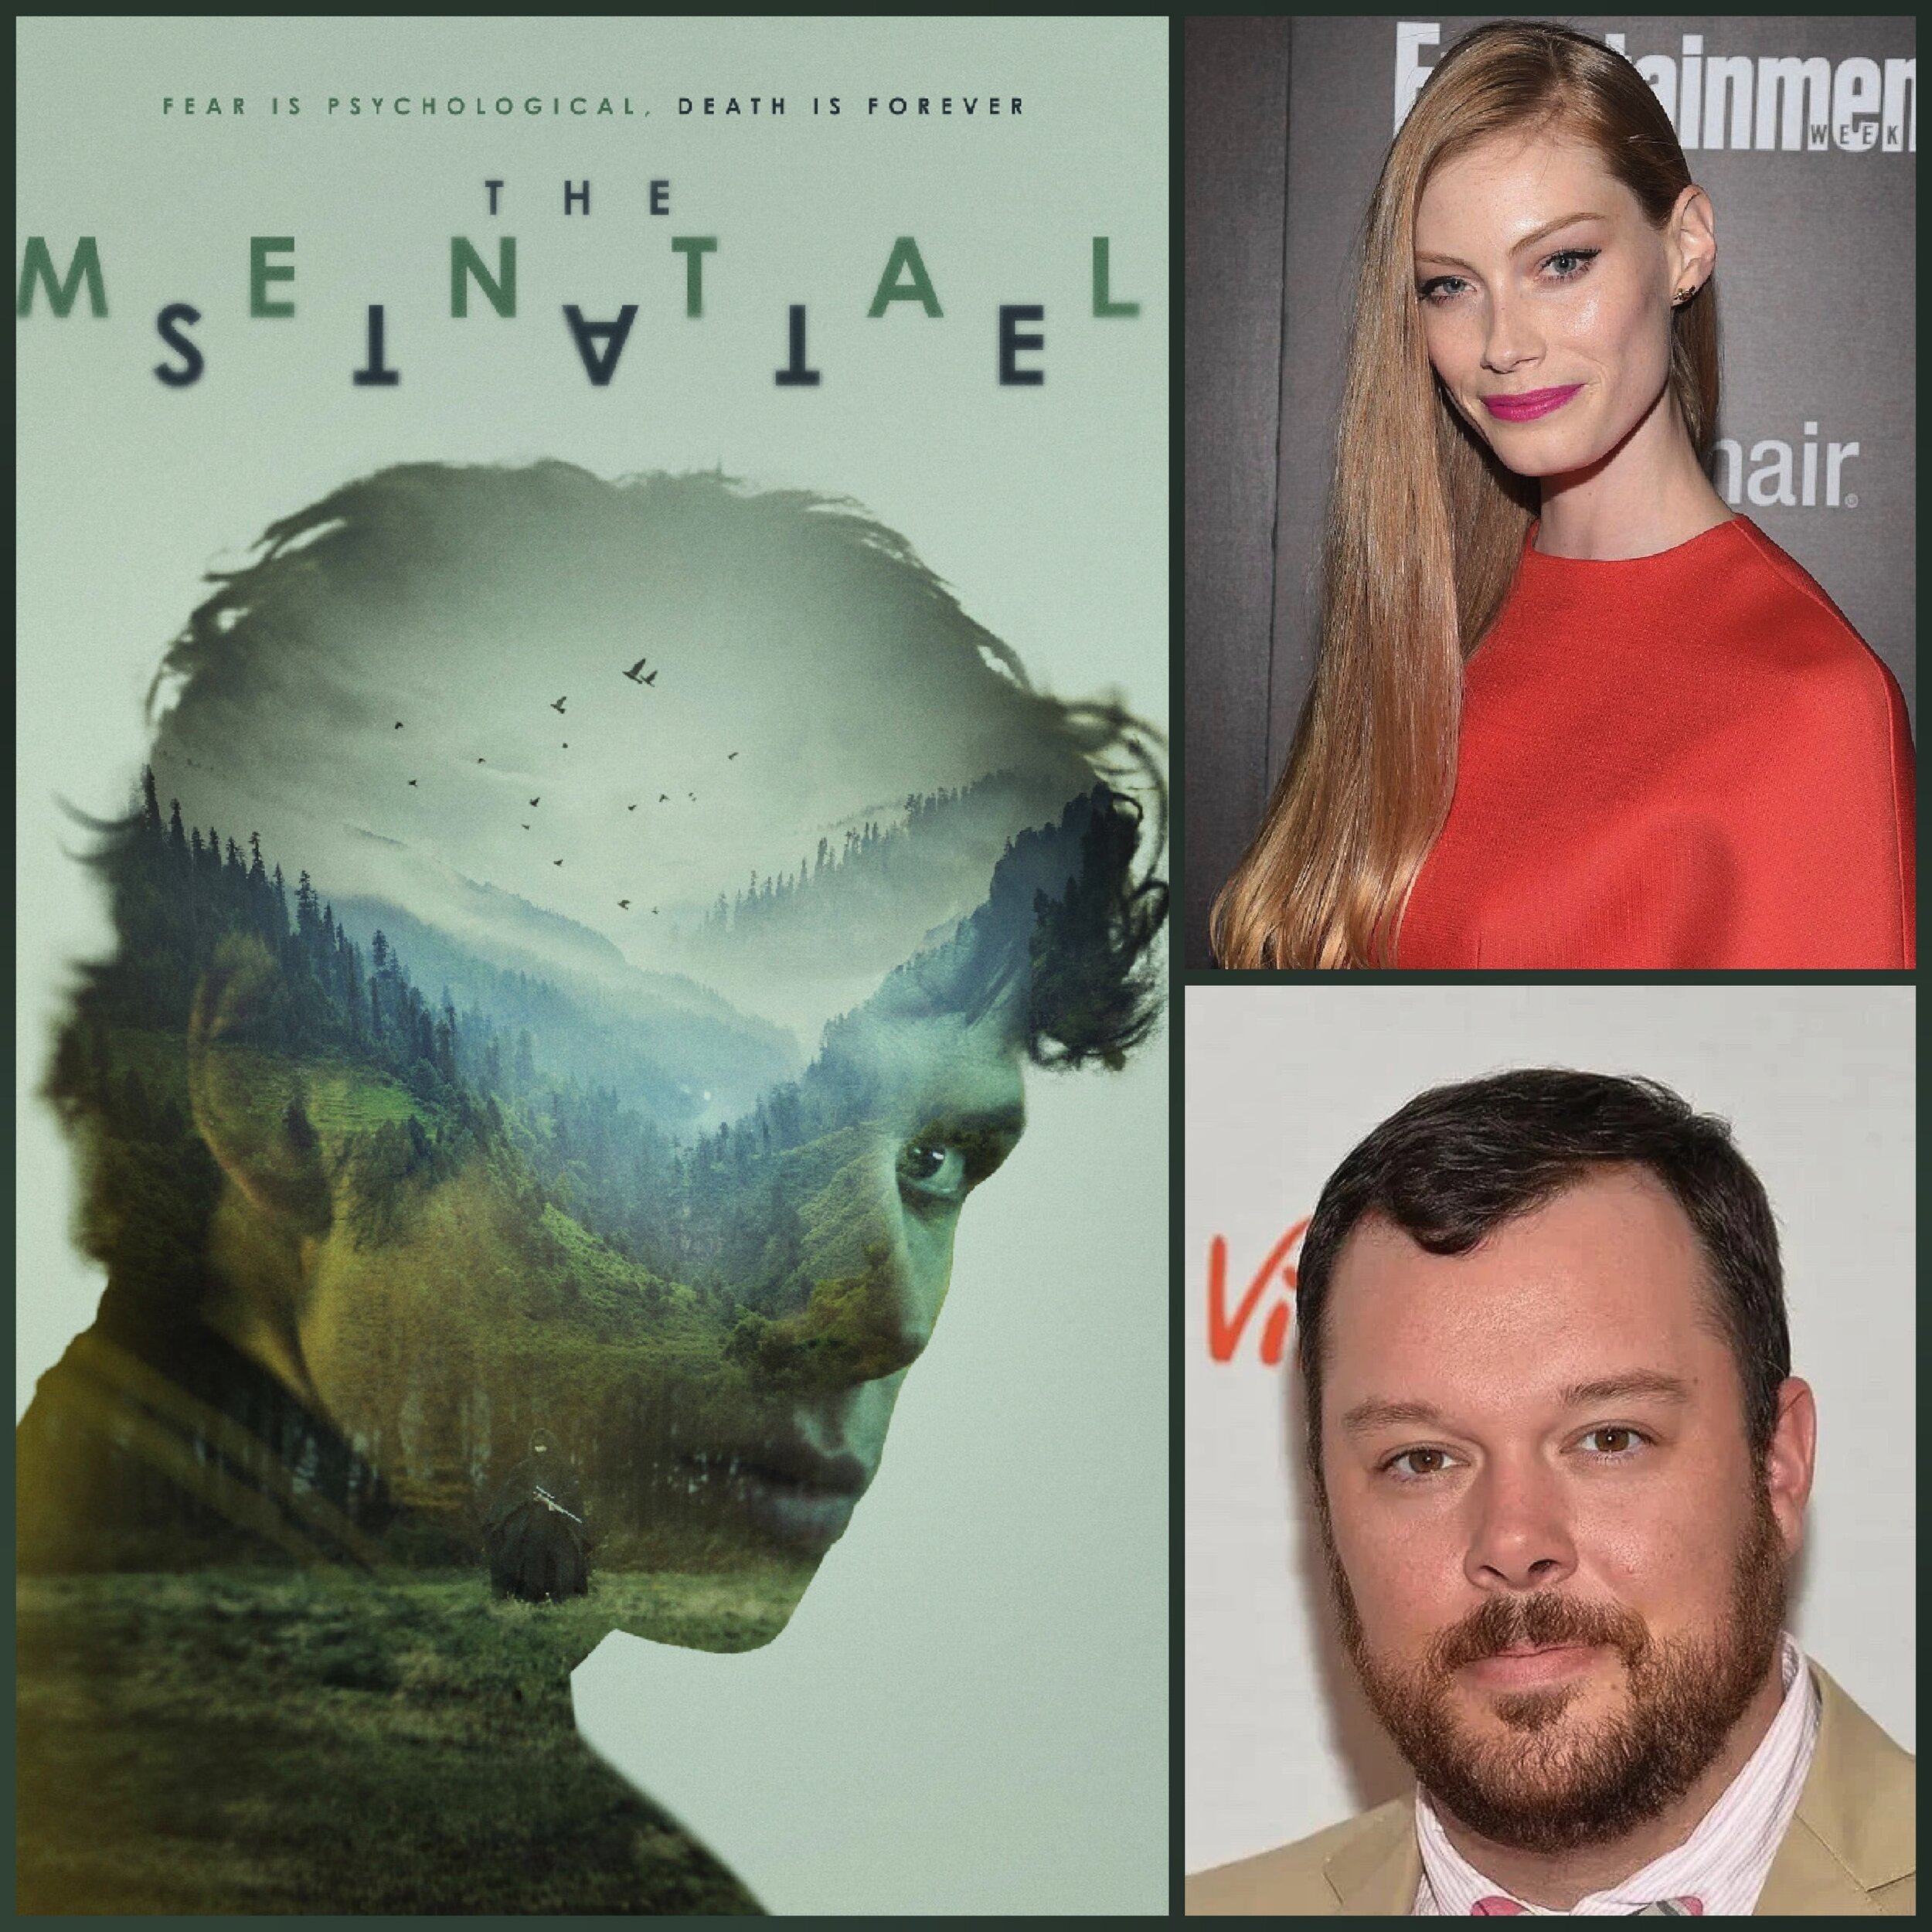 Congratulations to Alyssa Sutherland and Michael Gladis for their great work in &ldquo;The Mental State&rdquo; - now streaming on Apple TV and Prime Video #bookedit #incraigrity #thementalstate #michaelgladis @therealalyssas